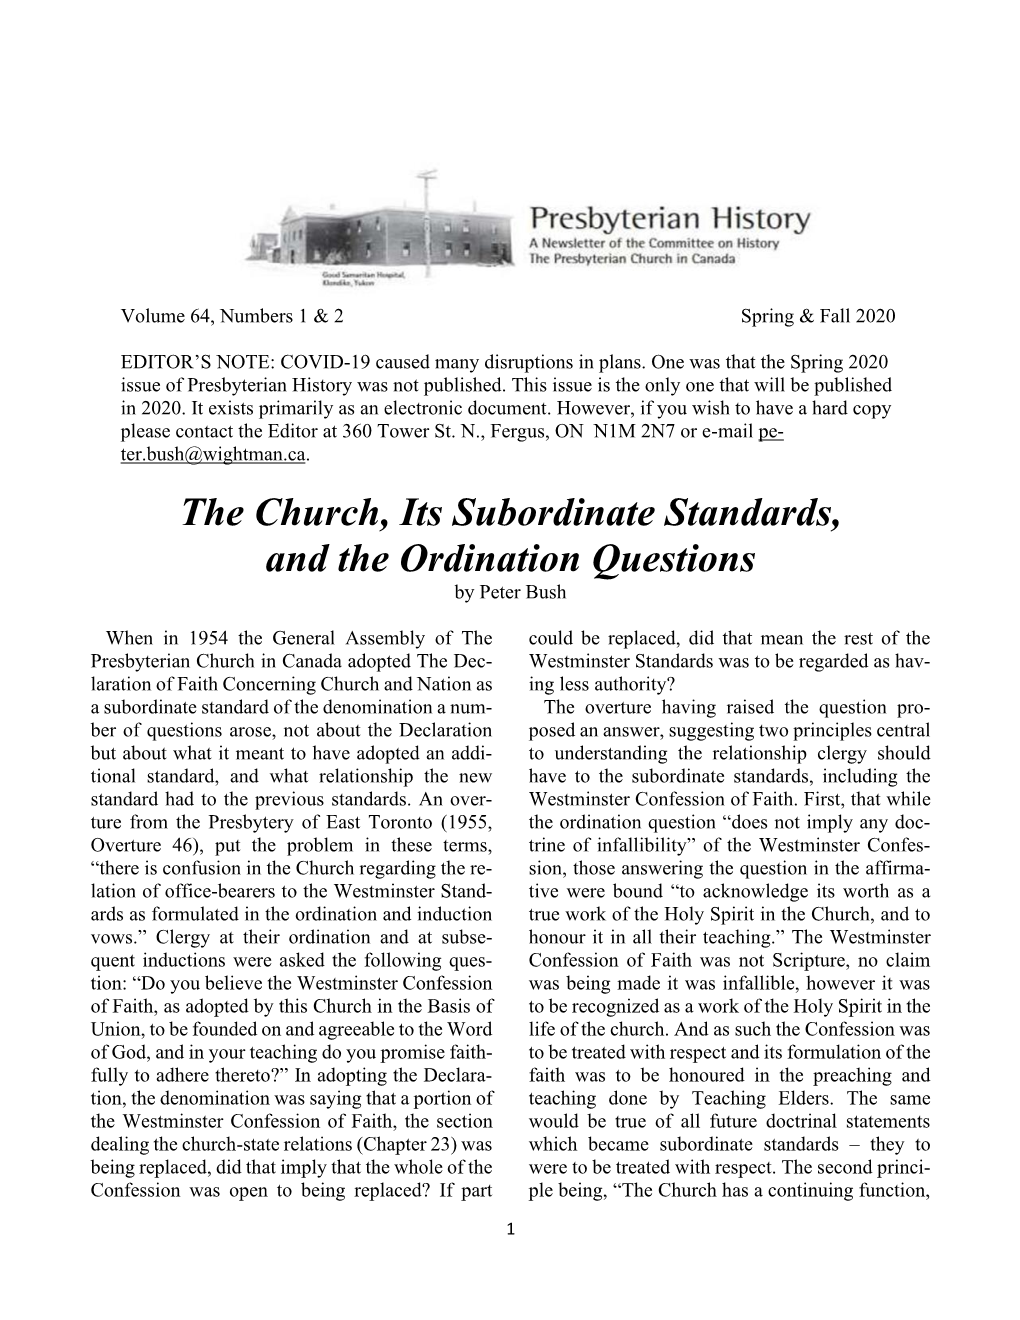 The Church, Its Subordinate Standards, and the Ordination Questions by Peter Bush